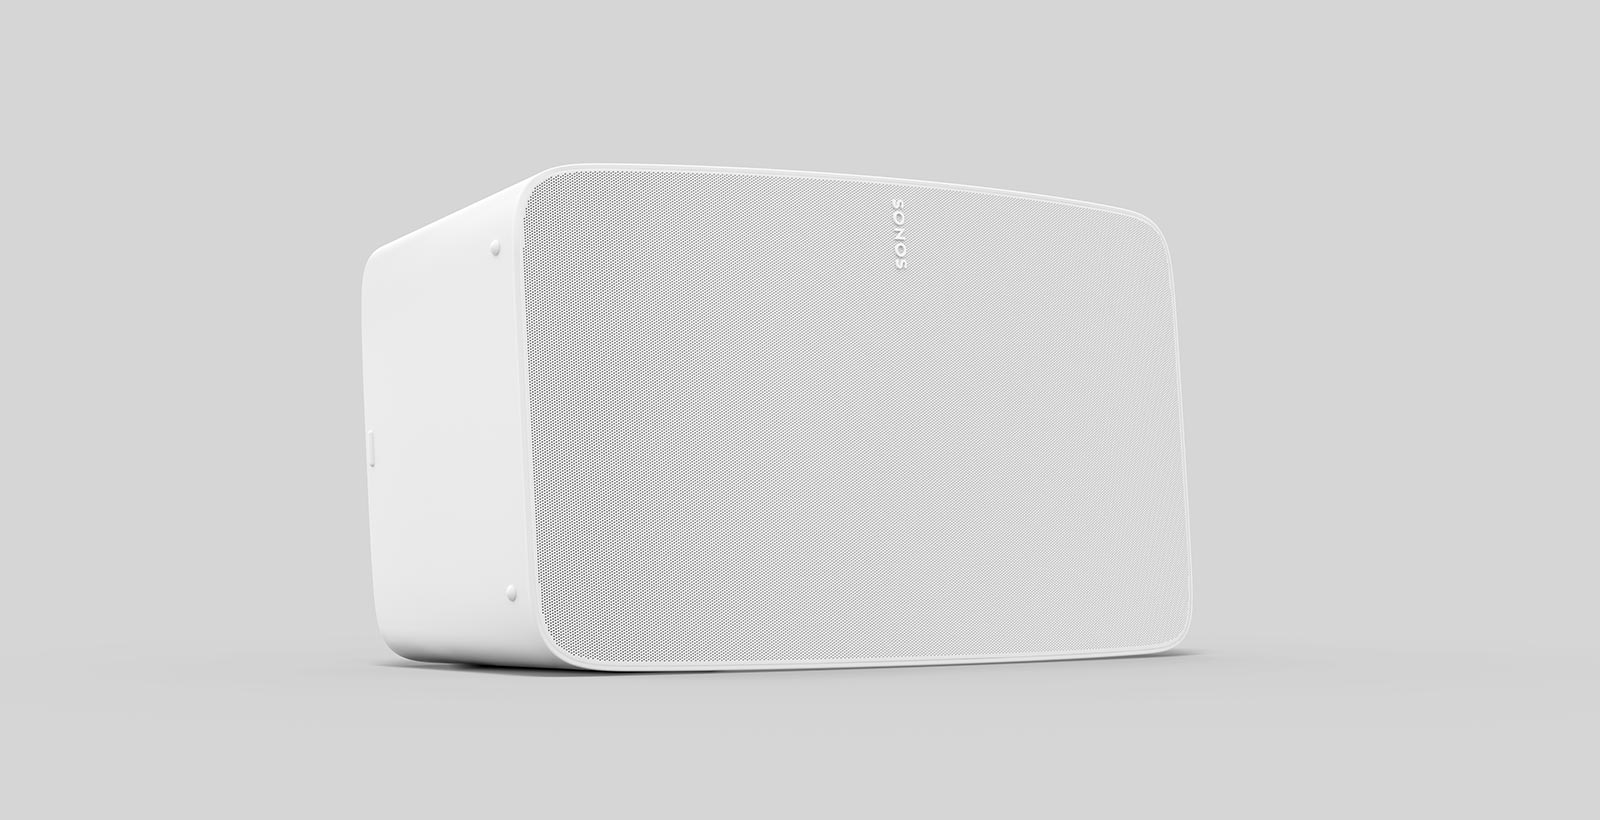 Sonos Play:5 is "Five" with Pickr